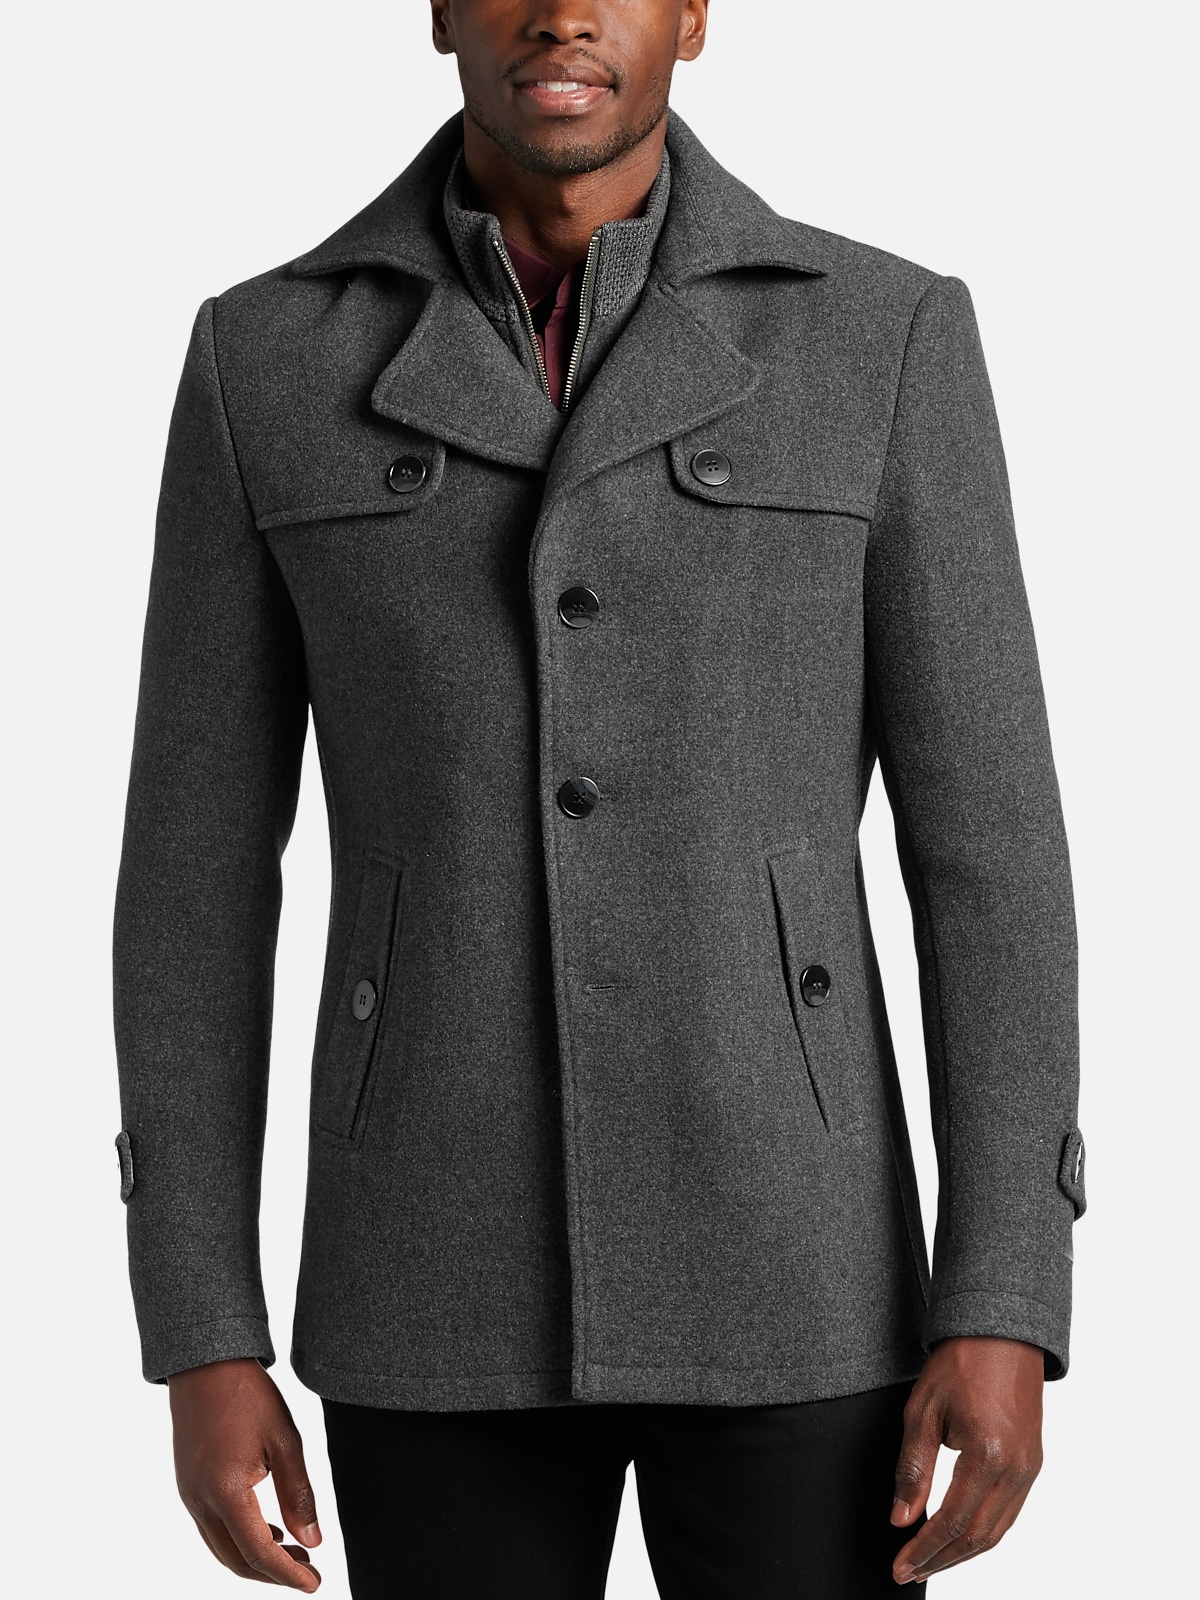 Michael Strahan Modern Fit Jacket with Bib Vest | All Clearance $39.99 ...